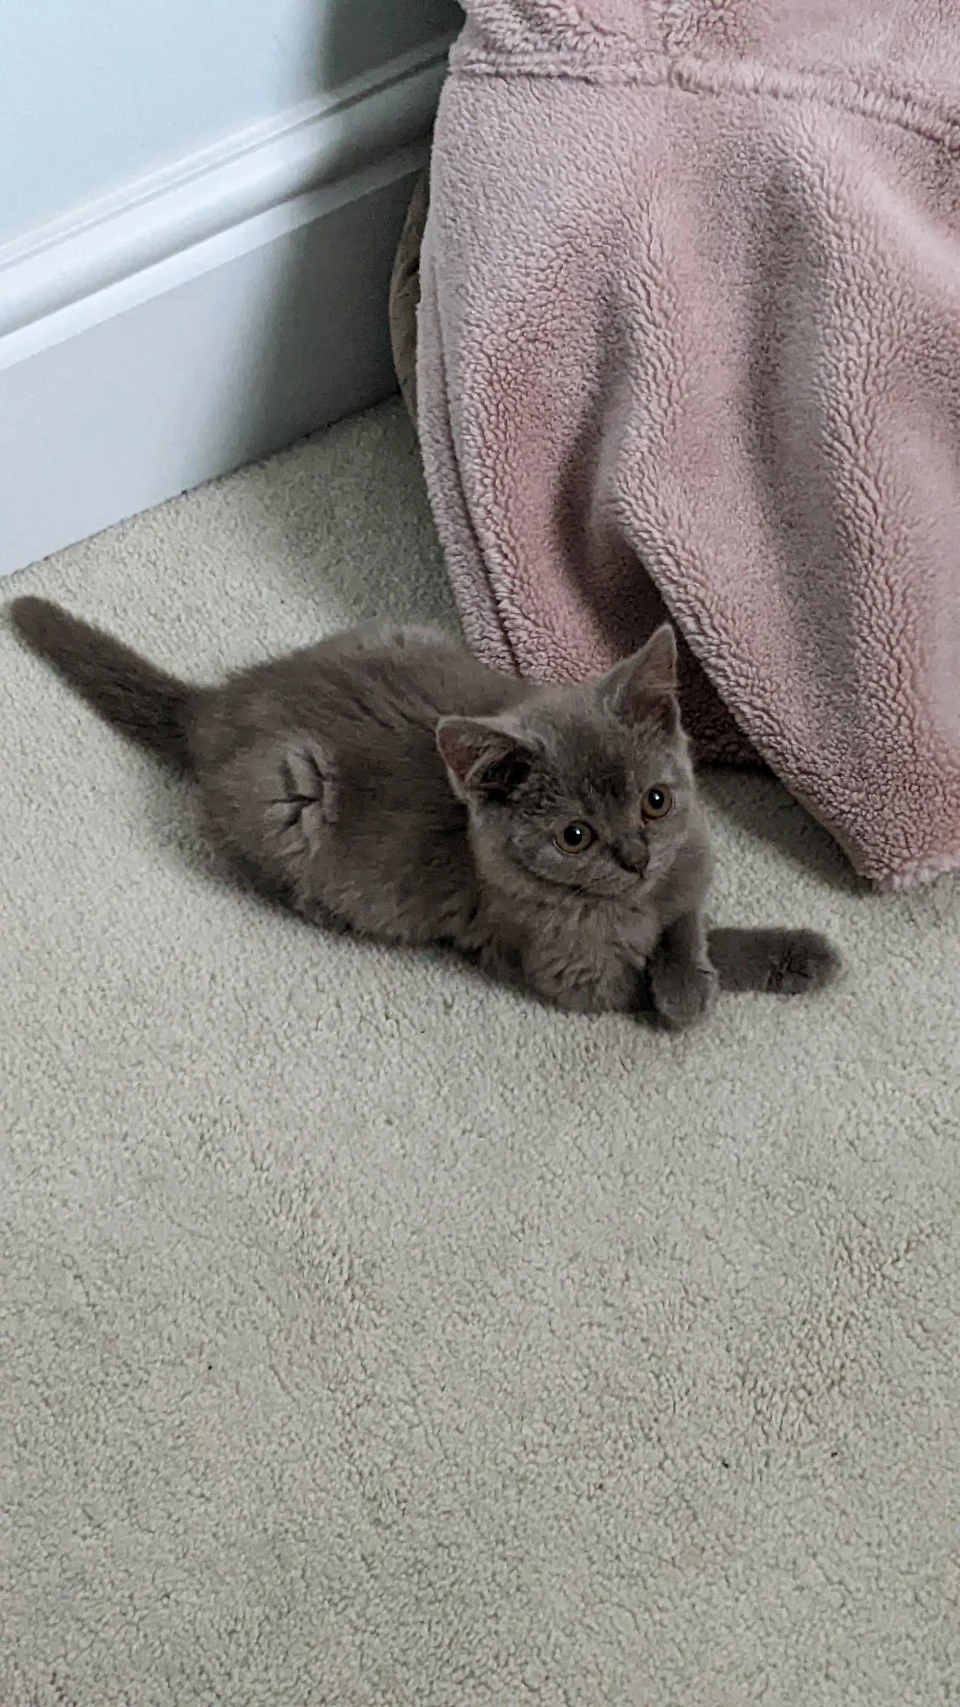 First pet and first time cat owner. Fiance and I got this little guy. Any tips?